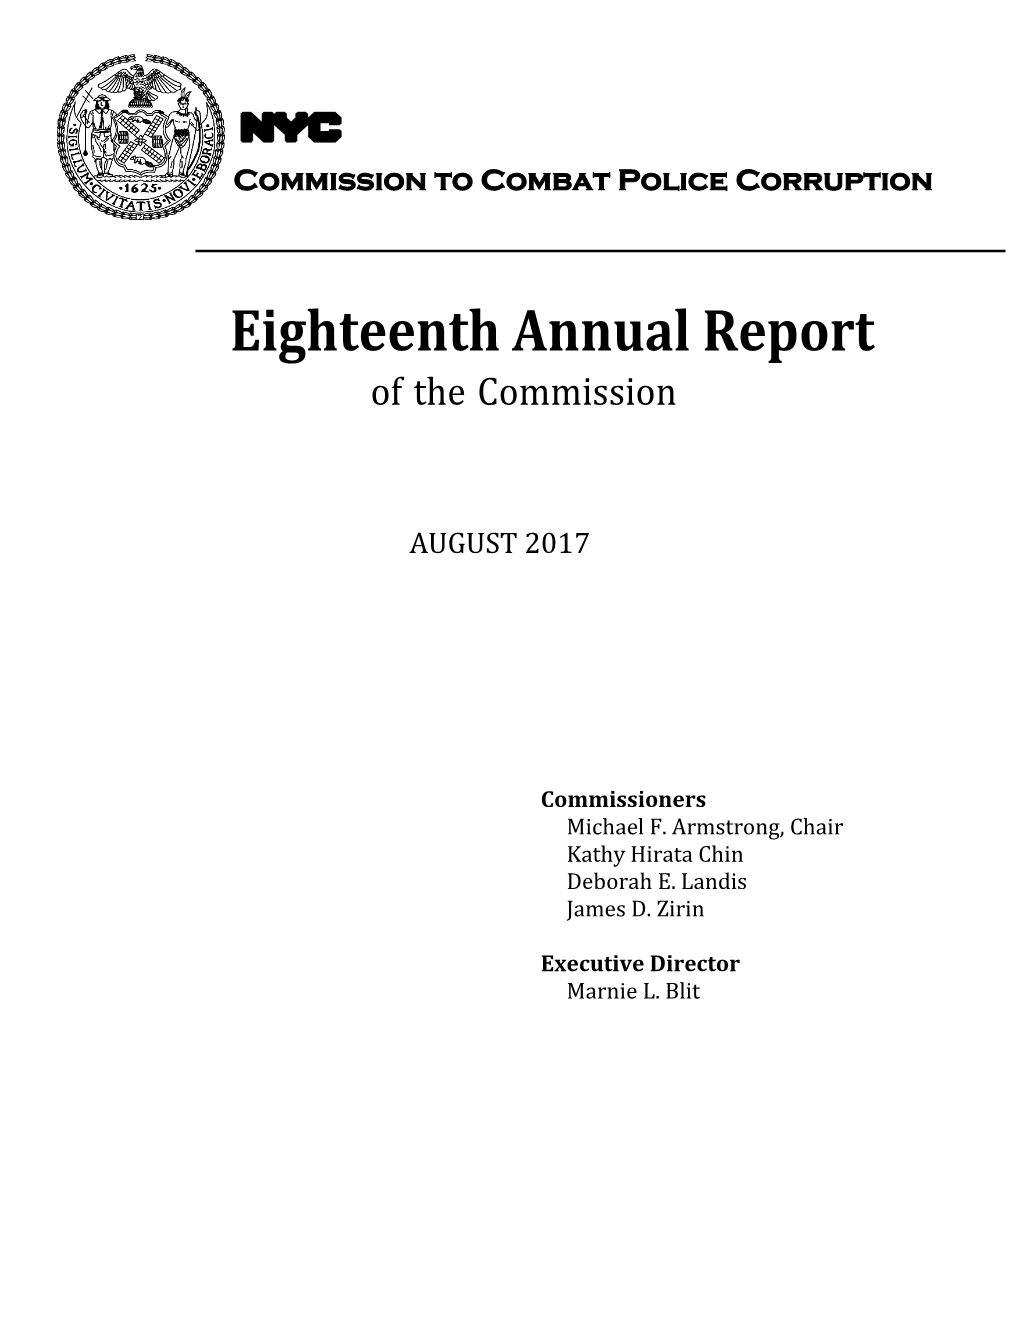 Eighteenth Annual Report of the Commission